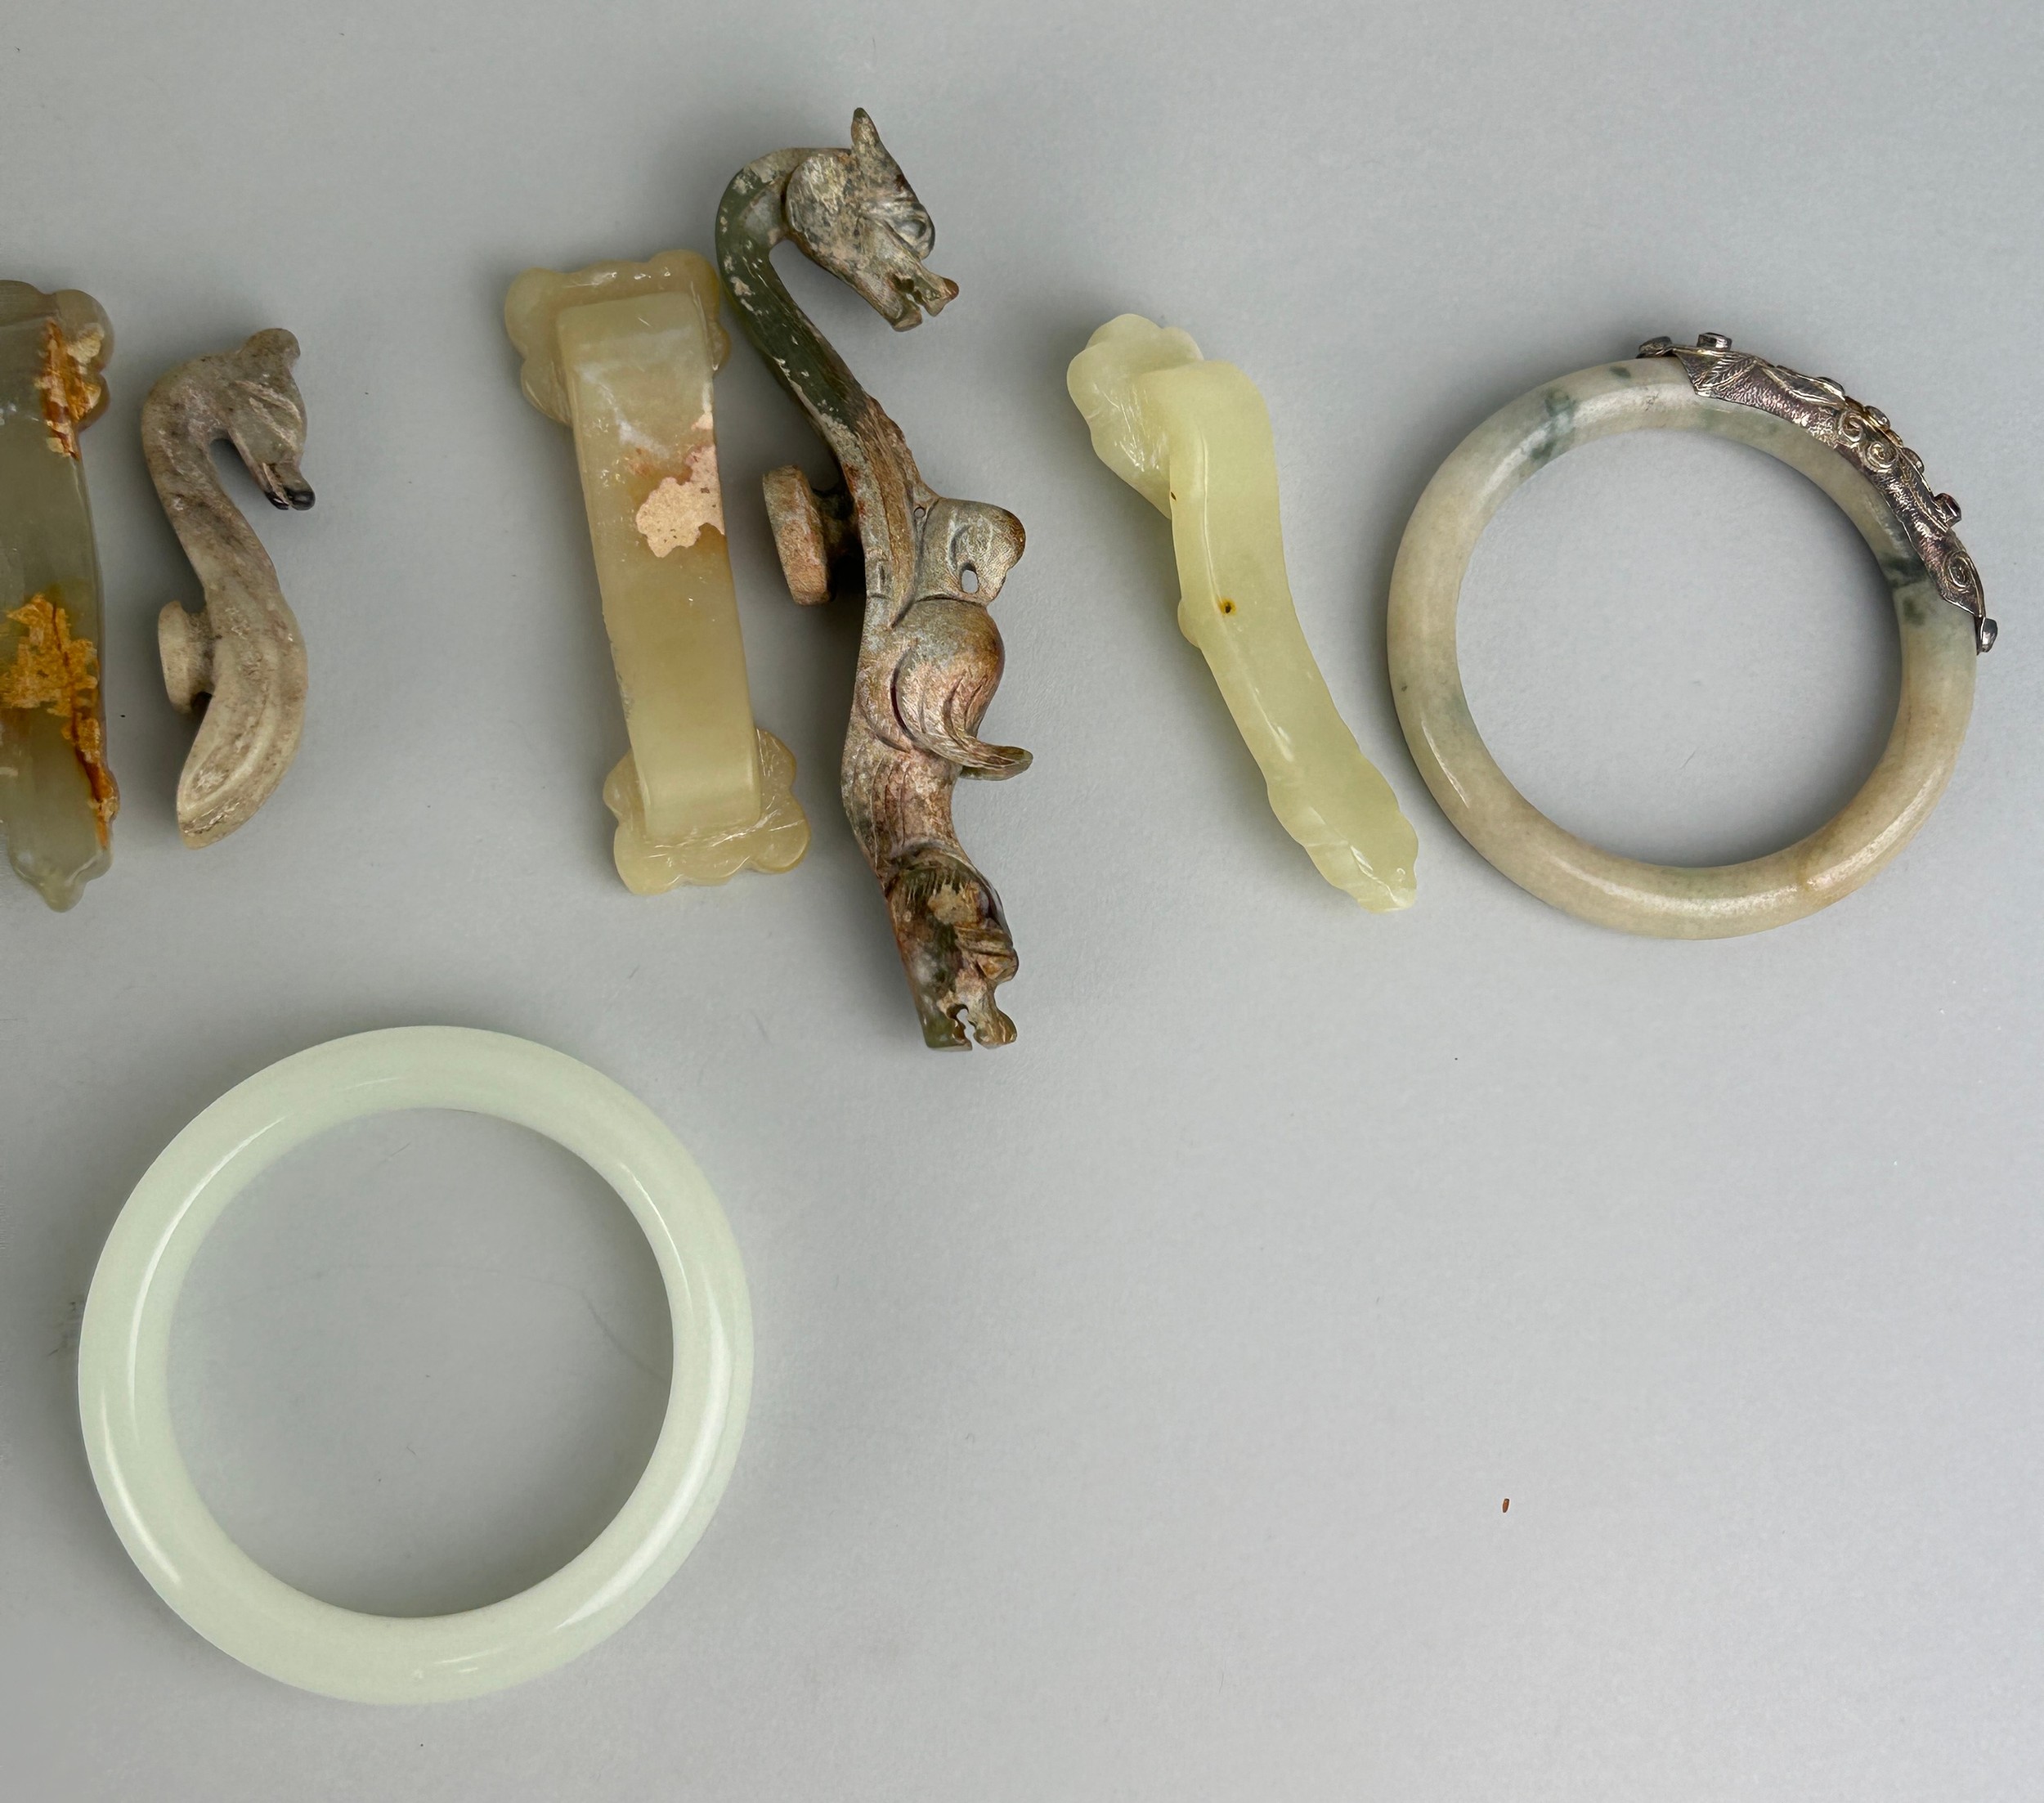 A COLLECTION OF FIVE CHINESE JADE OR STONE BANGLES ALONG WITH FIVE BELT HOOKS SOME IN THE ARCHAIC - Image 5 of 5